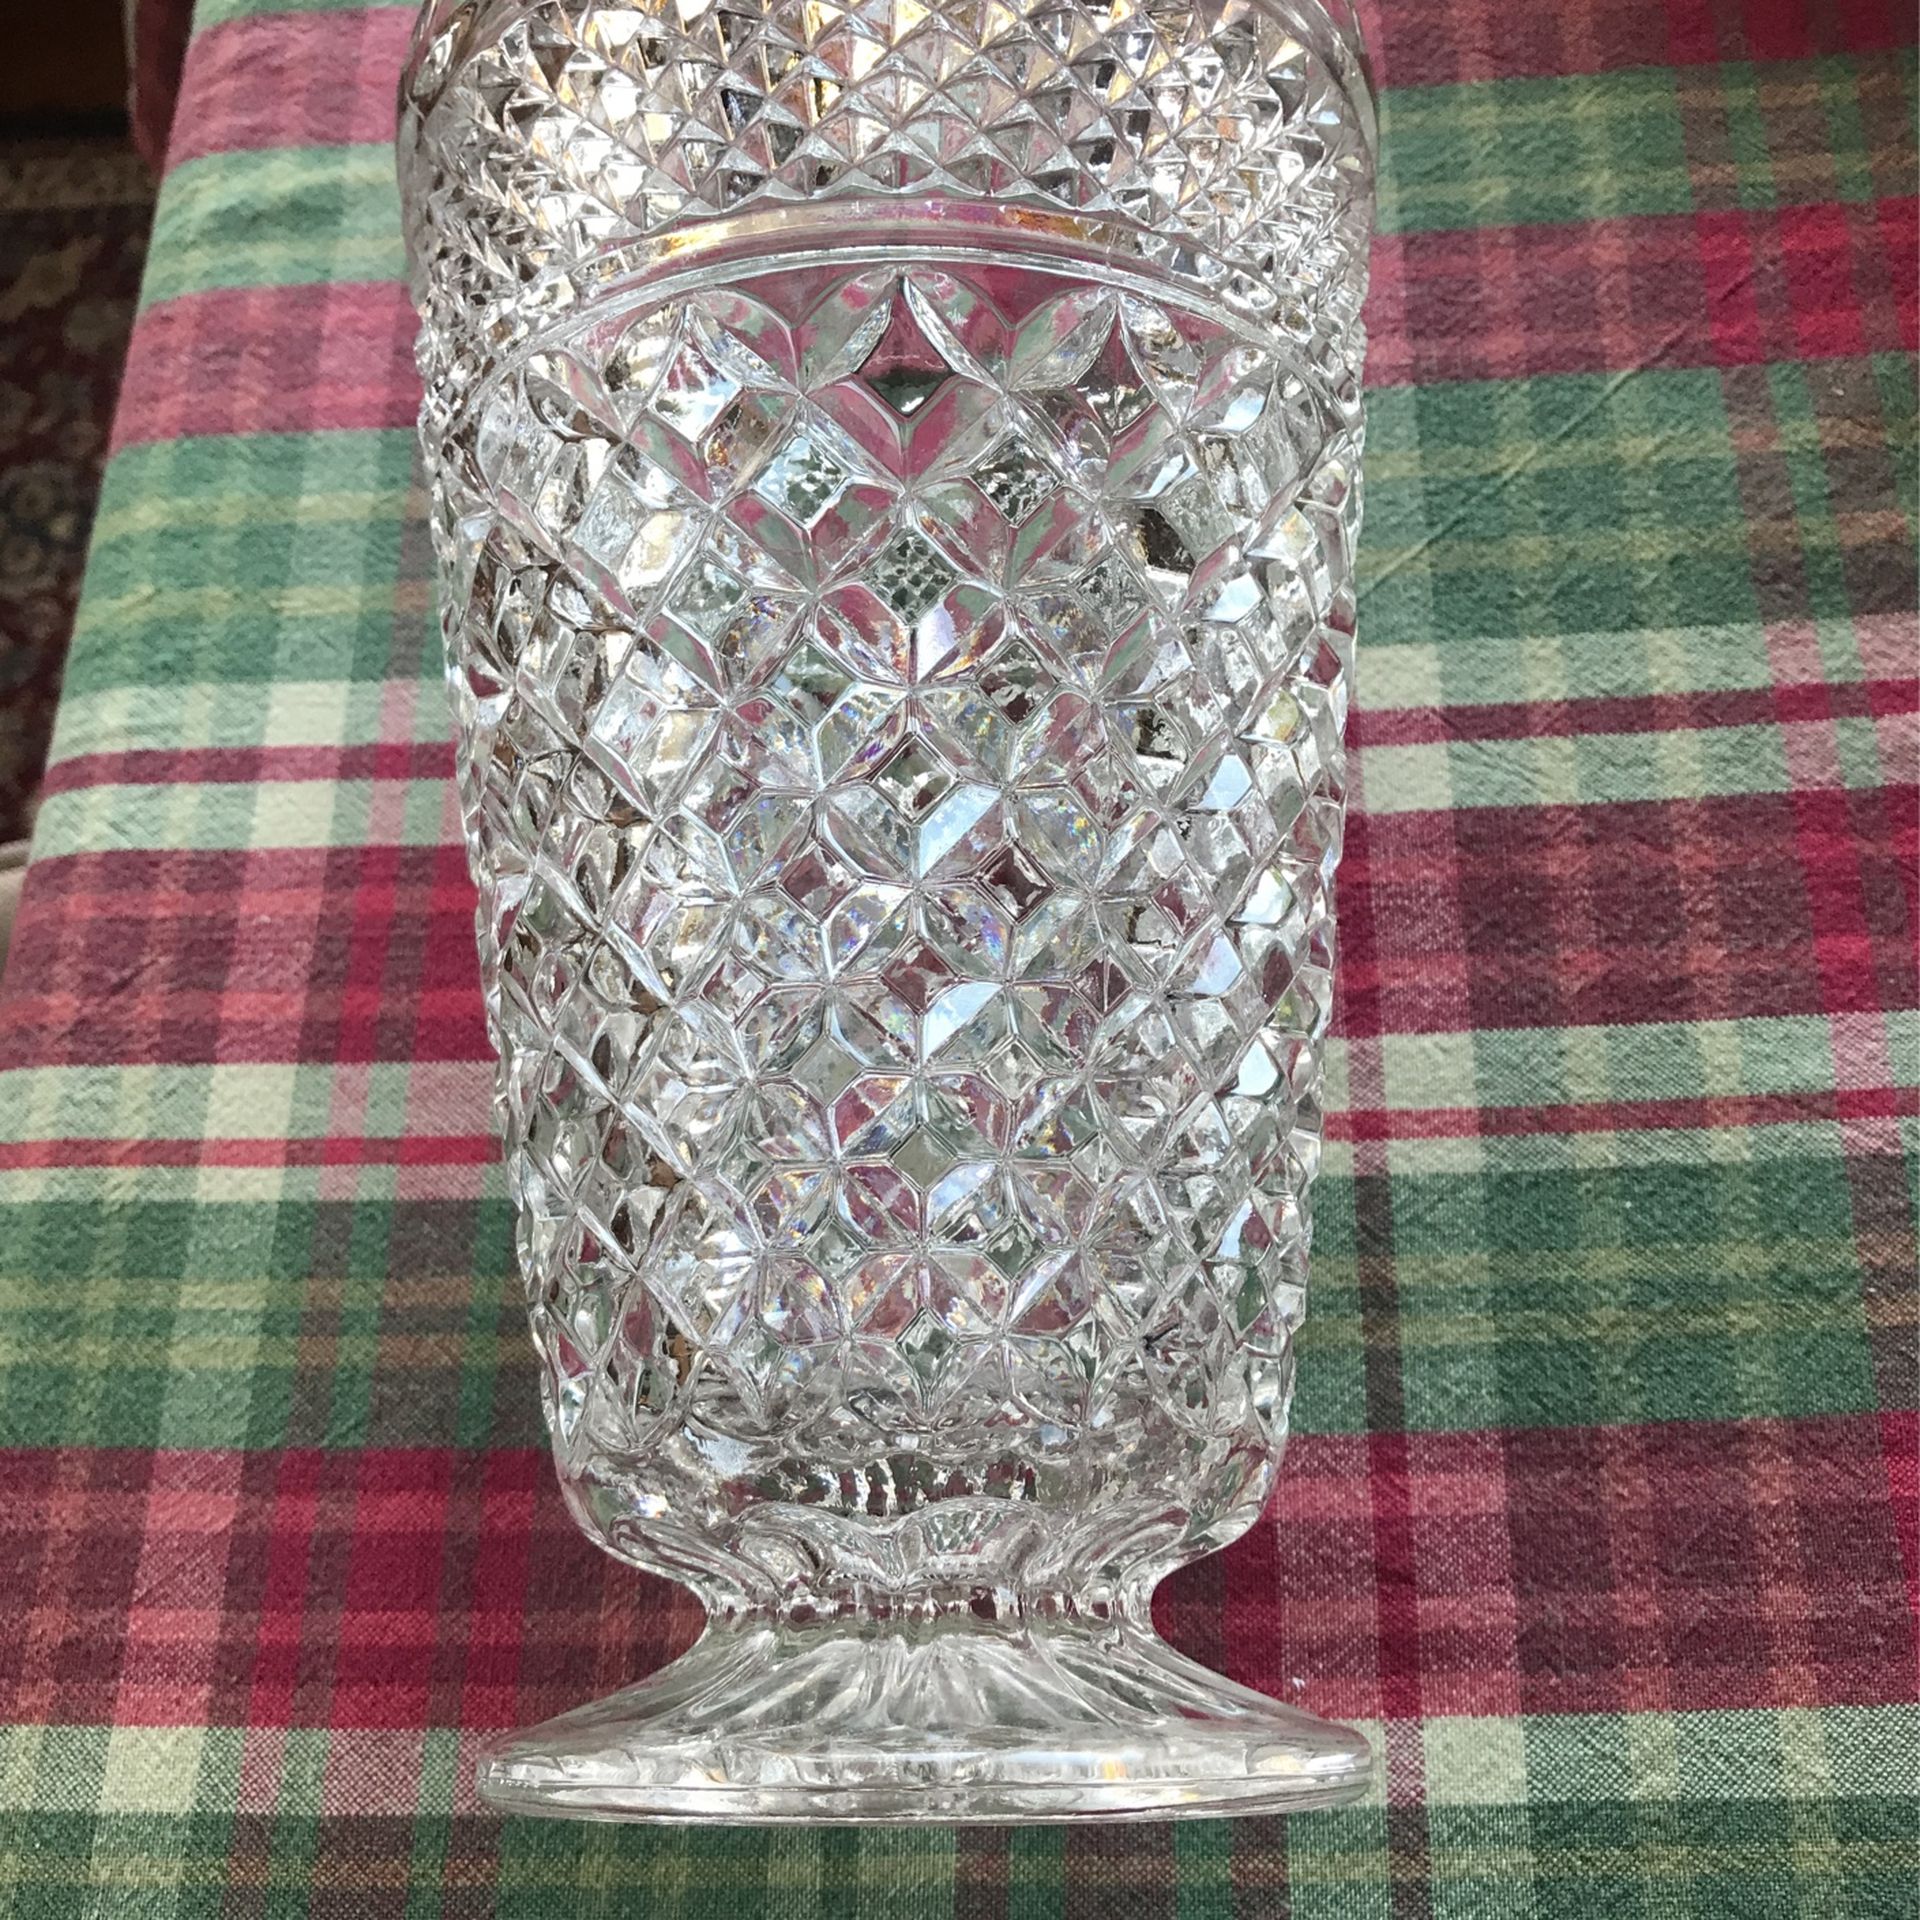 Vintage Anchor Hocking Wexford pattern clear glass flower vase in a crisscross design